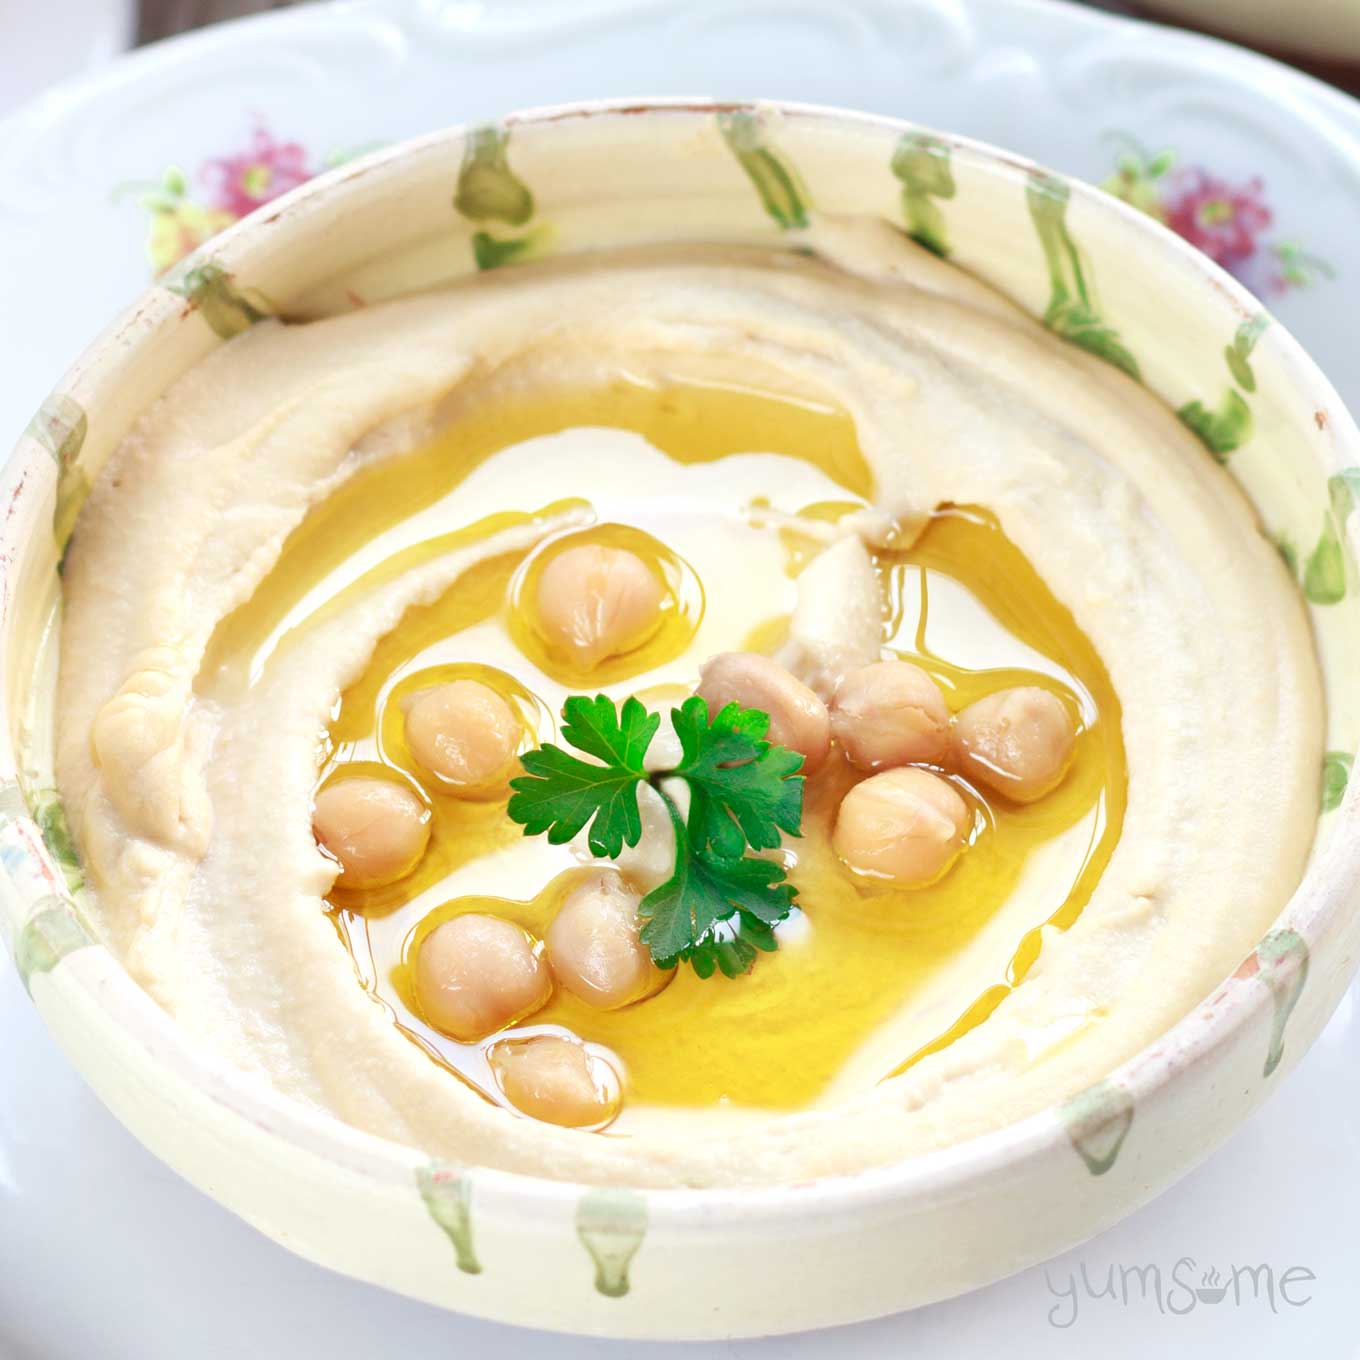 Smooth and creamy hummus in a dish.